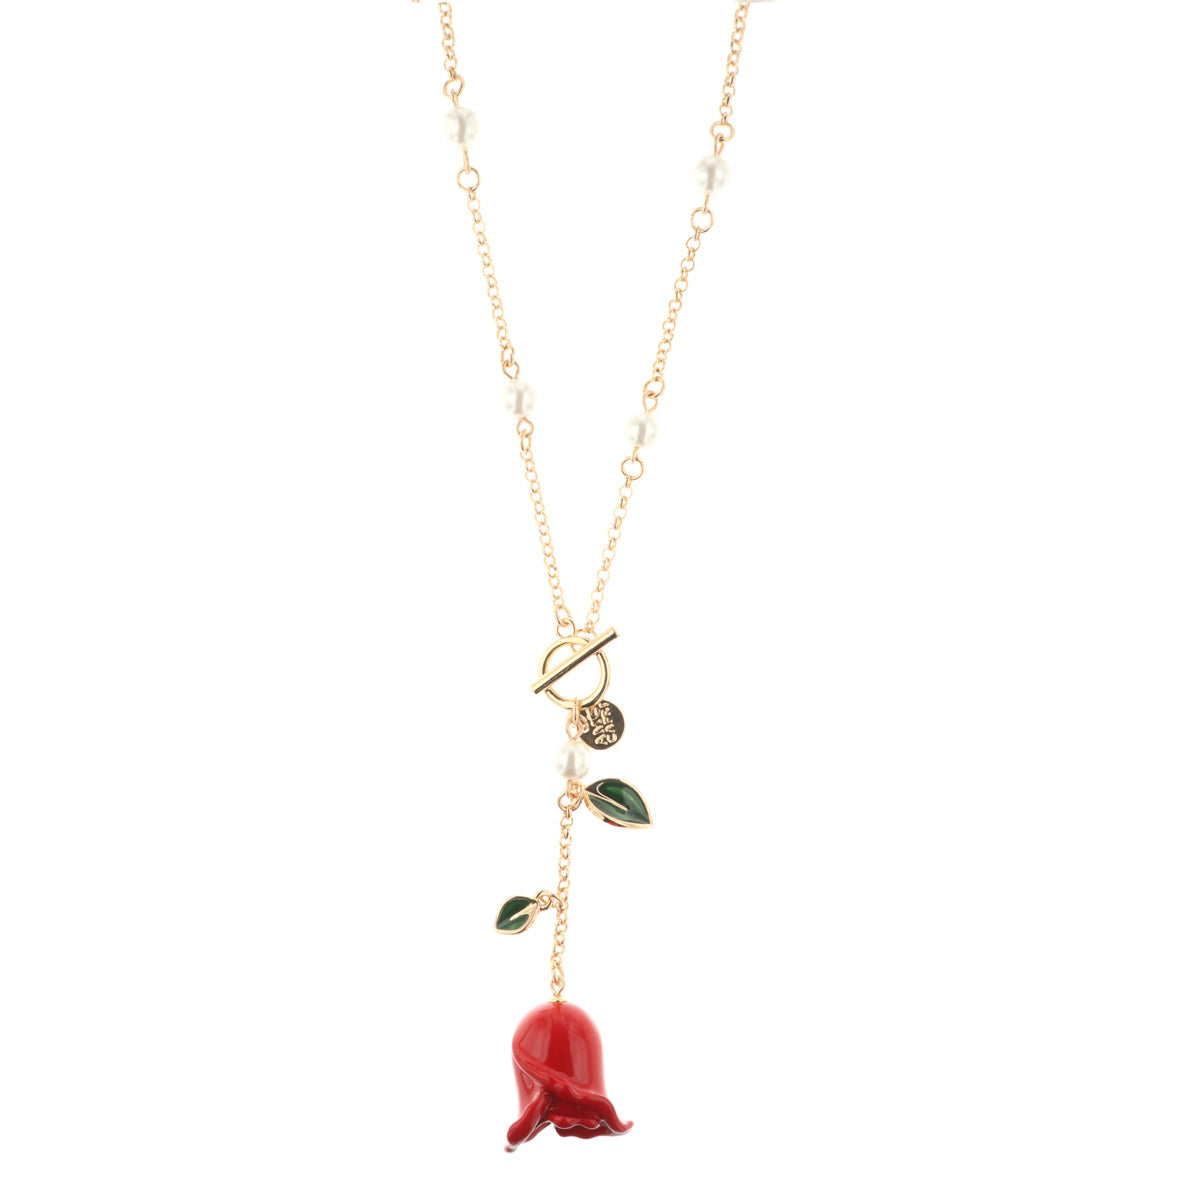 Metal necklace with t -closure and bell pendant in the shape of red rose and leaves